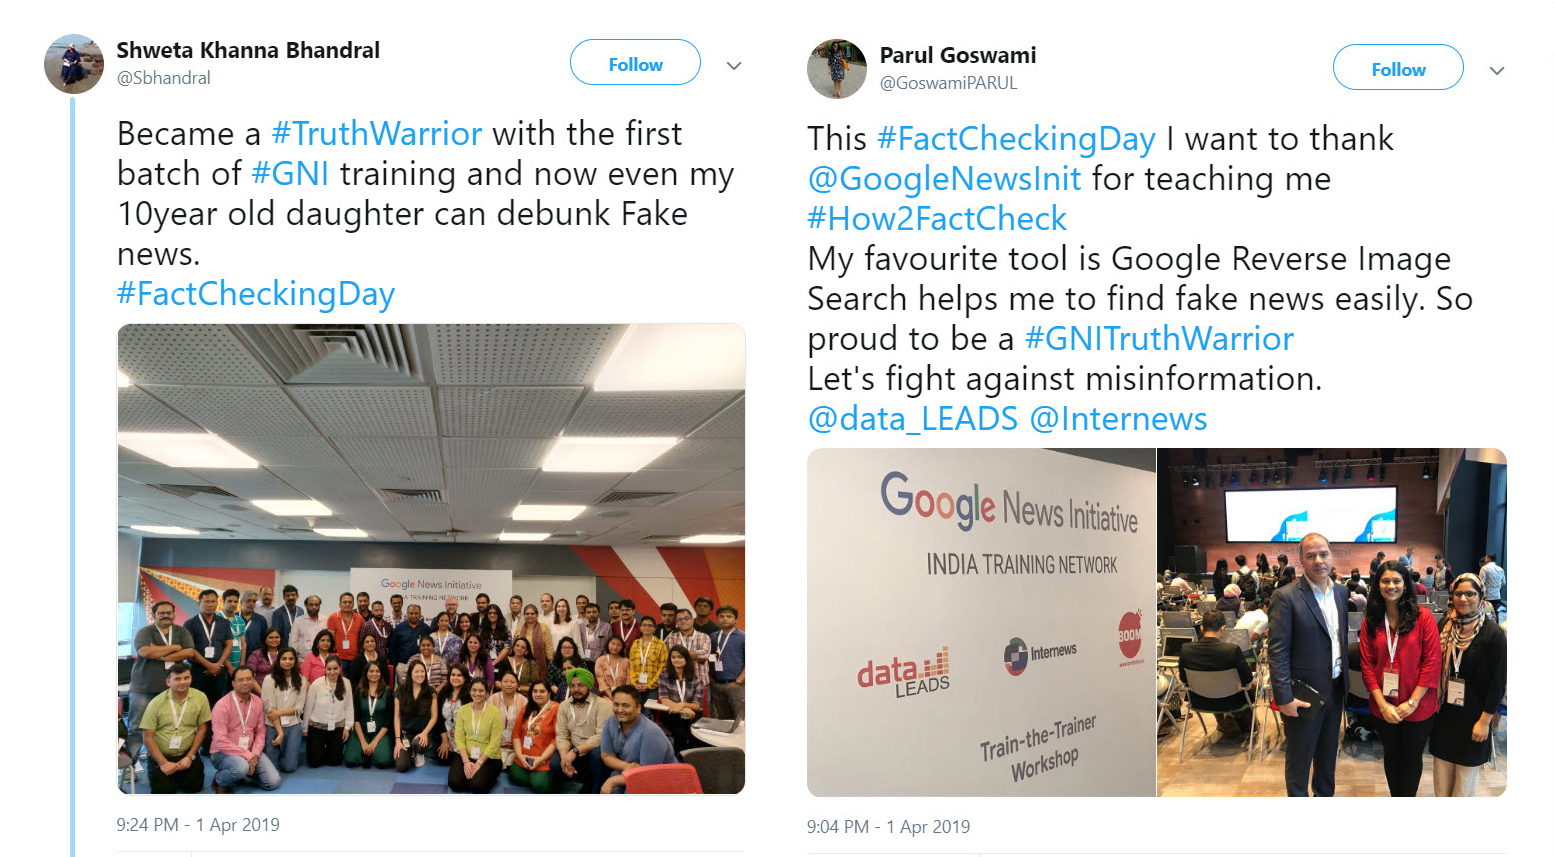 Tweet 1: Became a #TruthWarrior with the first batch of #GNI training and now even my 10 year old daughter can debunk Fake news. #FactCheckingDay. Tweet 2: This #FactCheckingDay I want to thank @GoogleNewsInit for teaching me #How2FactCheck. My favourite tool is Google Reverse image Search helps me find fake news easily. So proud to be a #GNITruthWarrior. Let us fight against misinformation. @data_LEADS @Internews